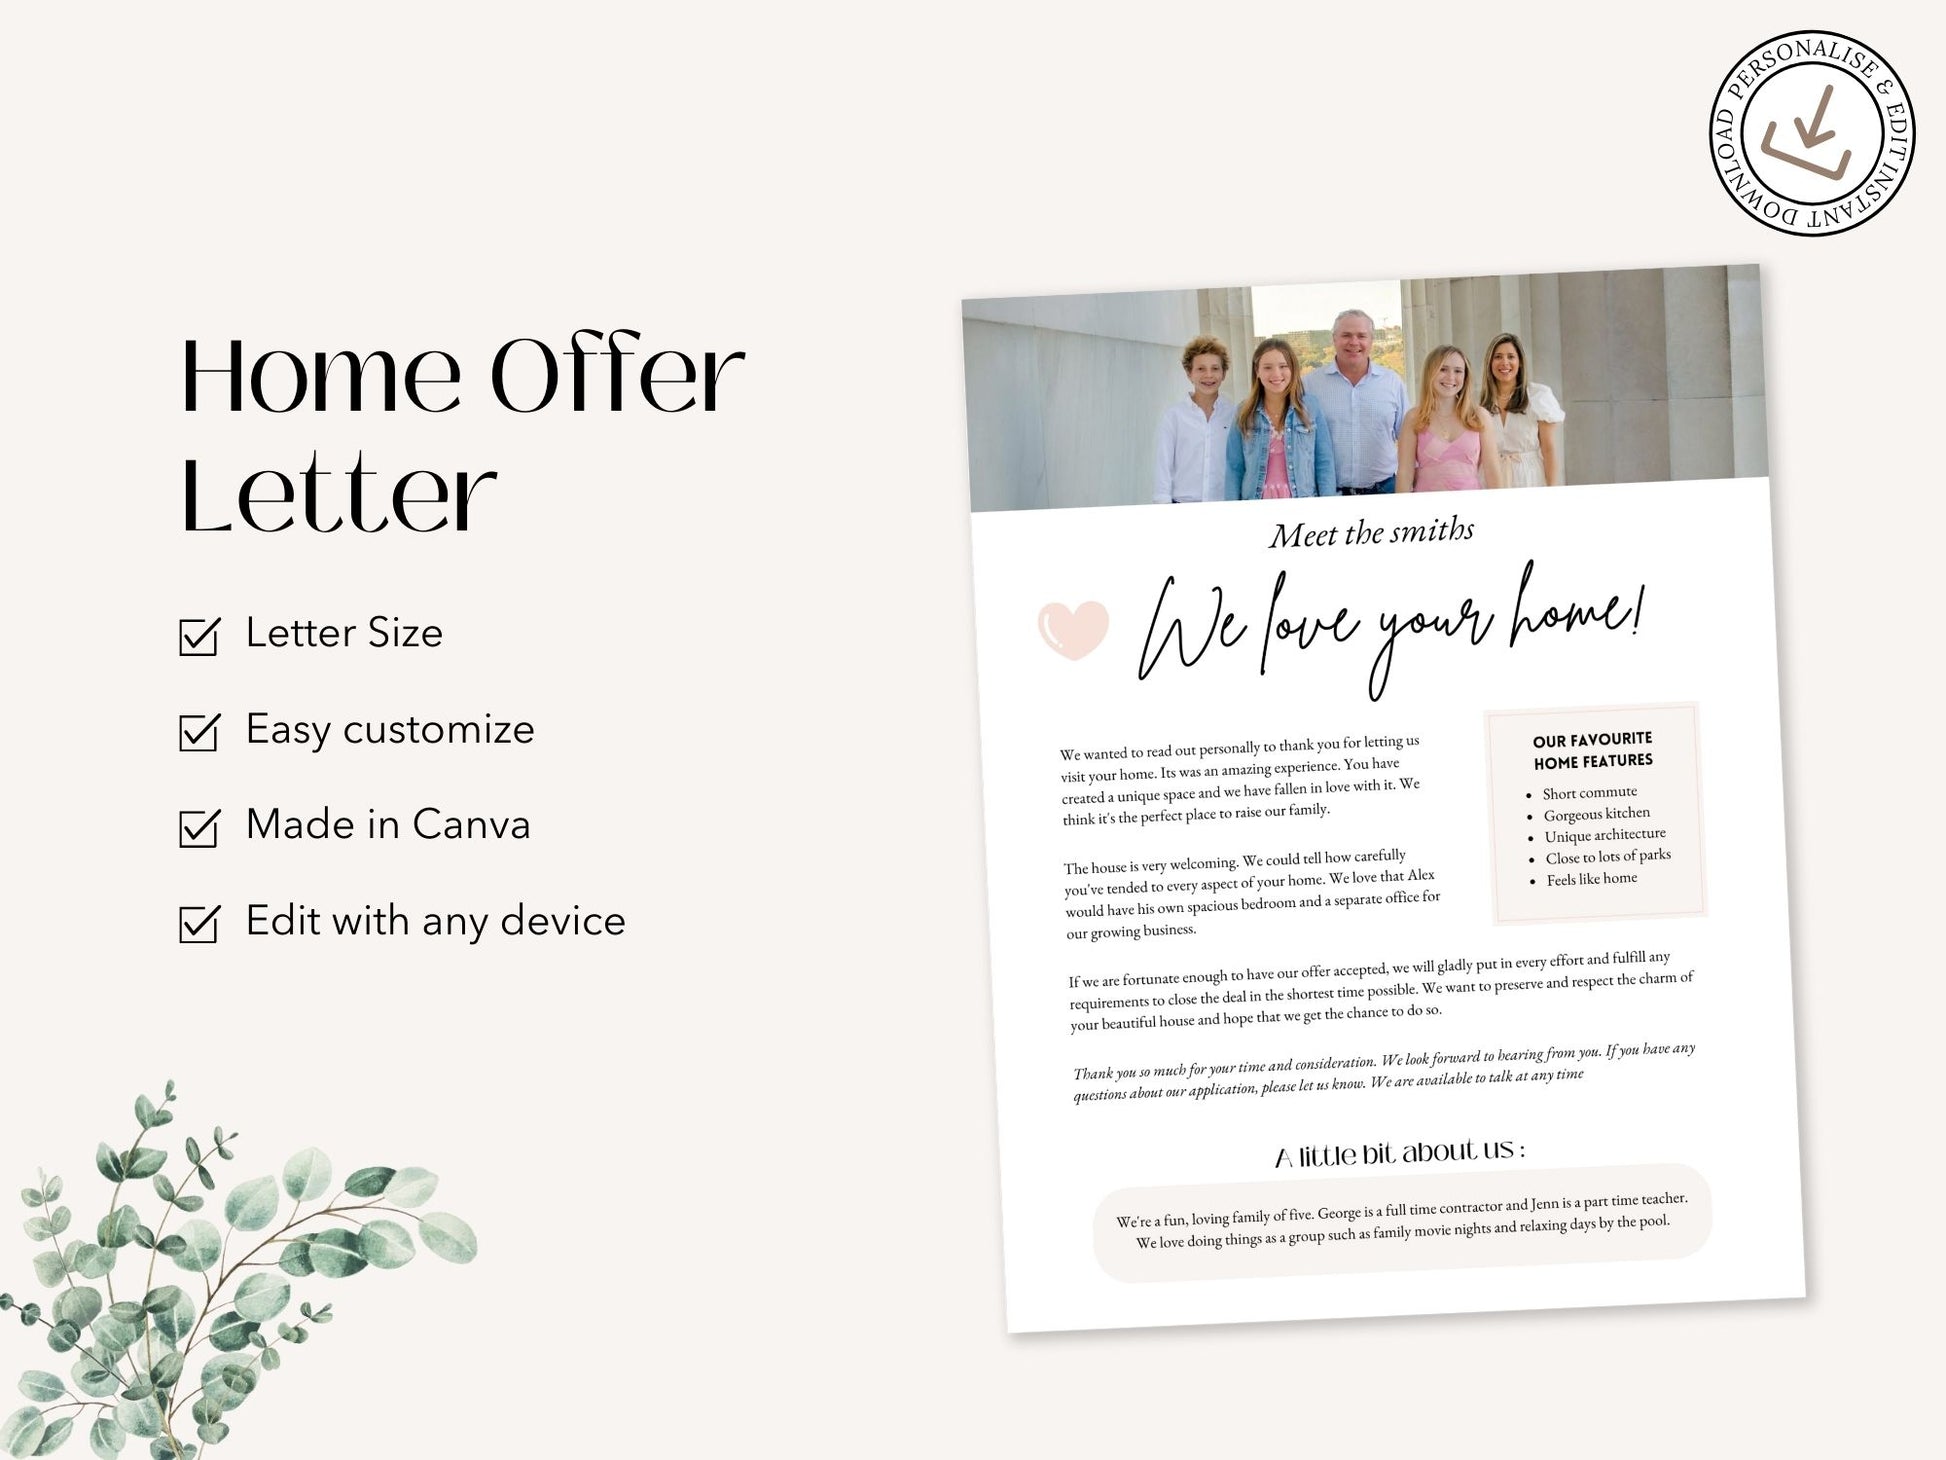 Home Offer Letter Vol 01 - Make a lasting impression with a professionally crafted buyer's letter.